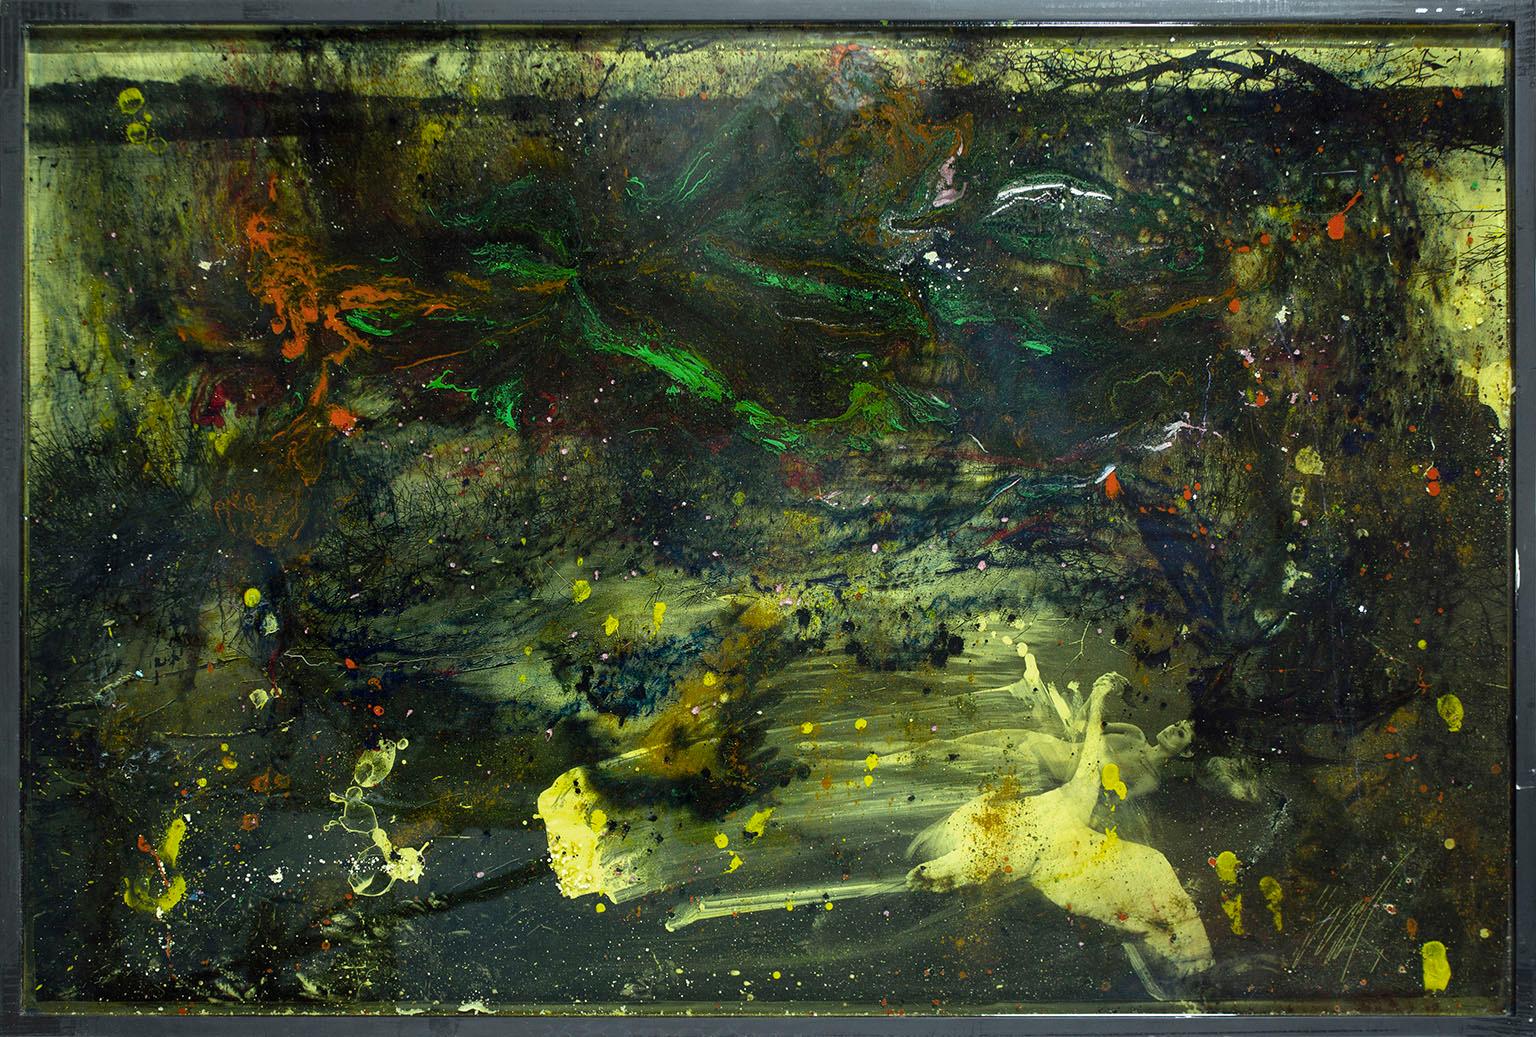 "Hidden Lake" diamond-dusted archival print and mixed media encased in resin